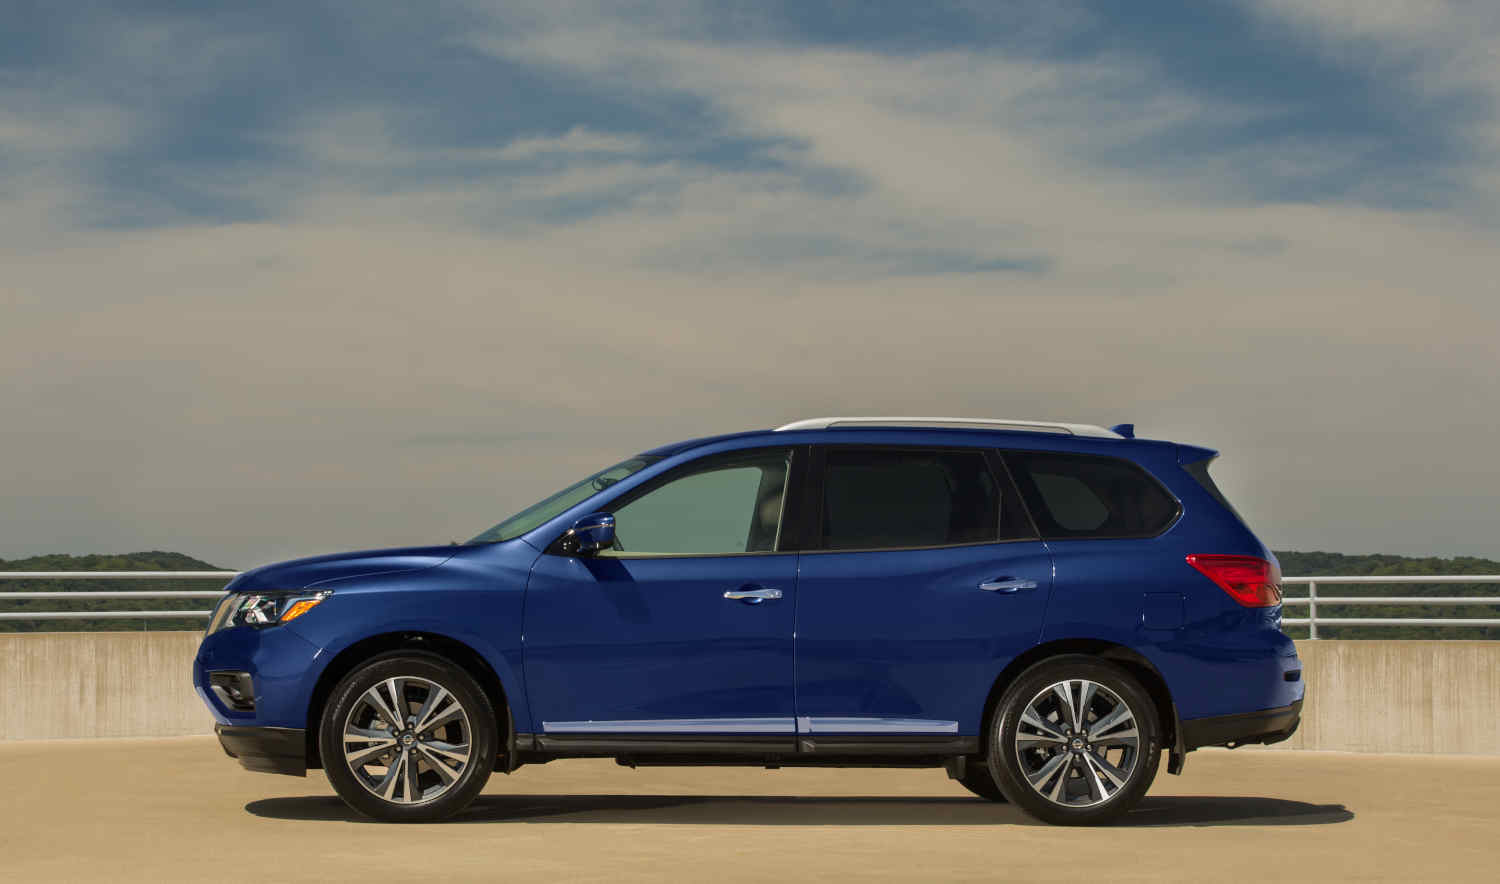 The Nissan Pathfinder is a safe and affordable used SUVs